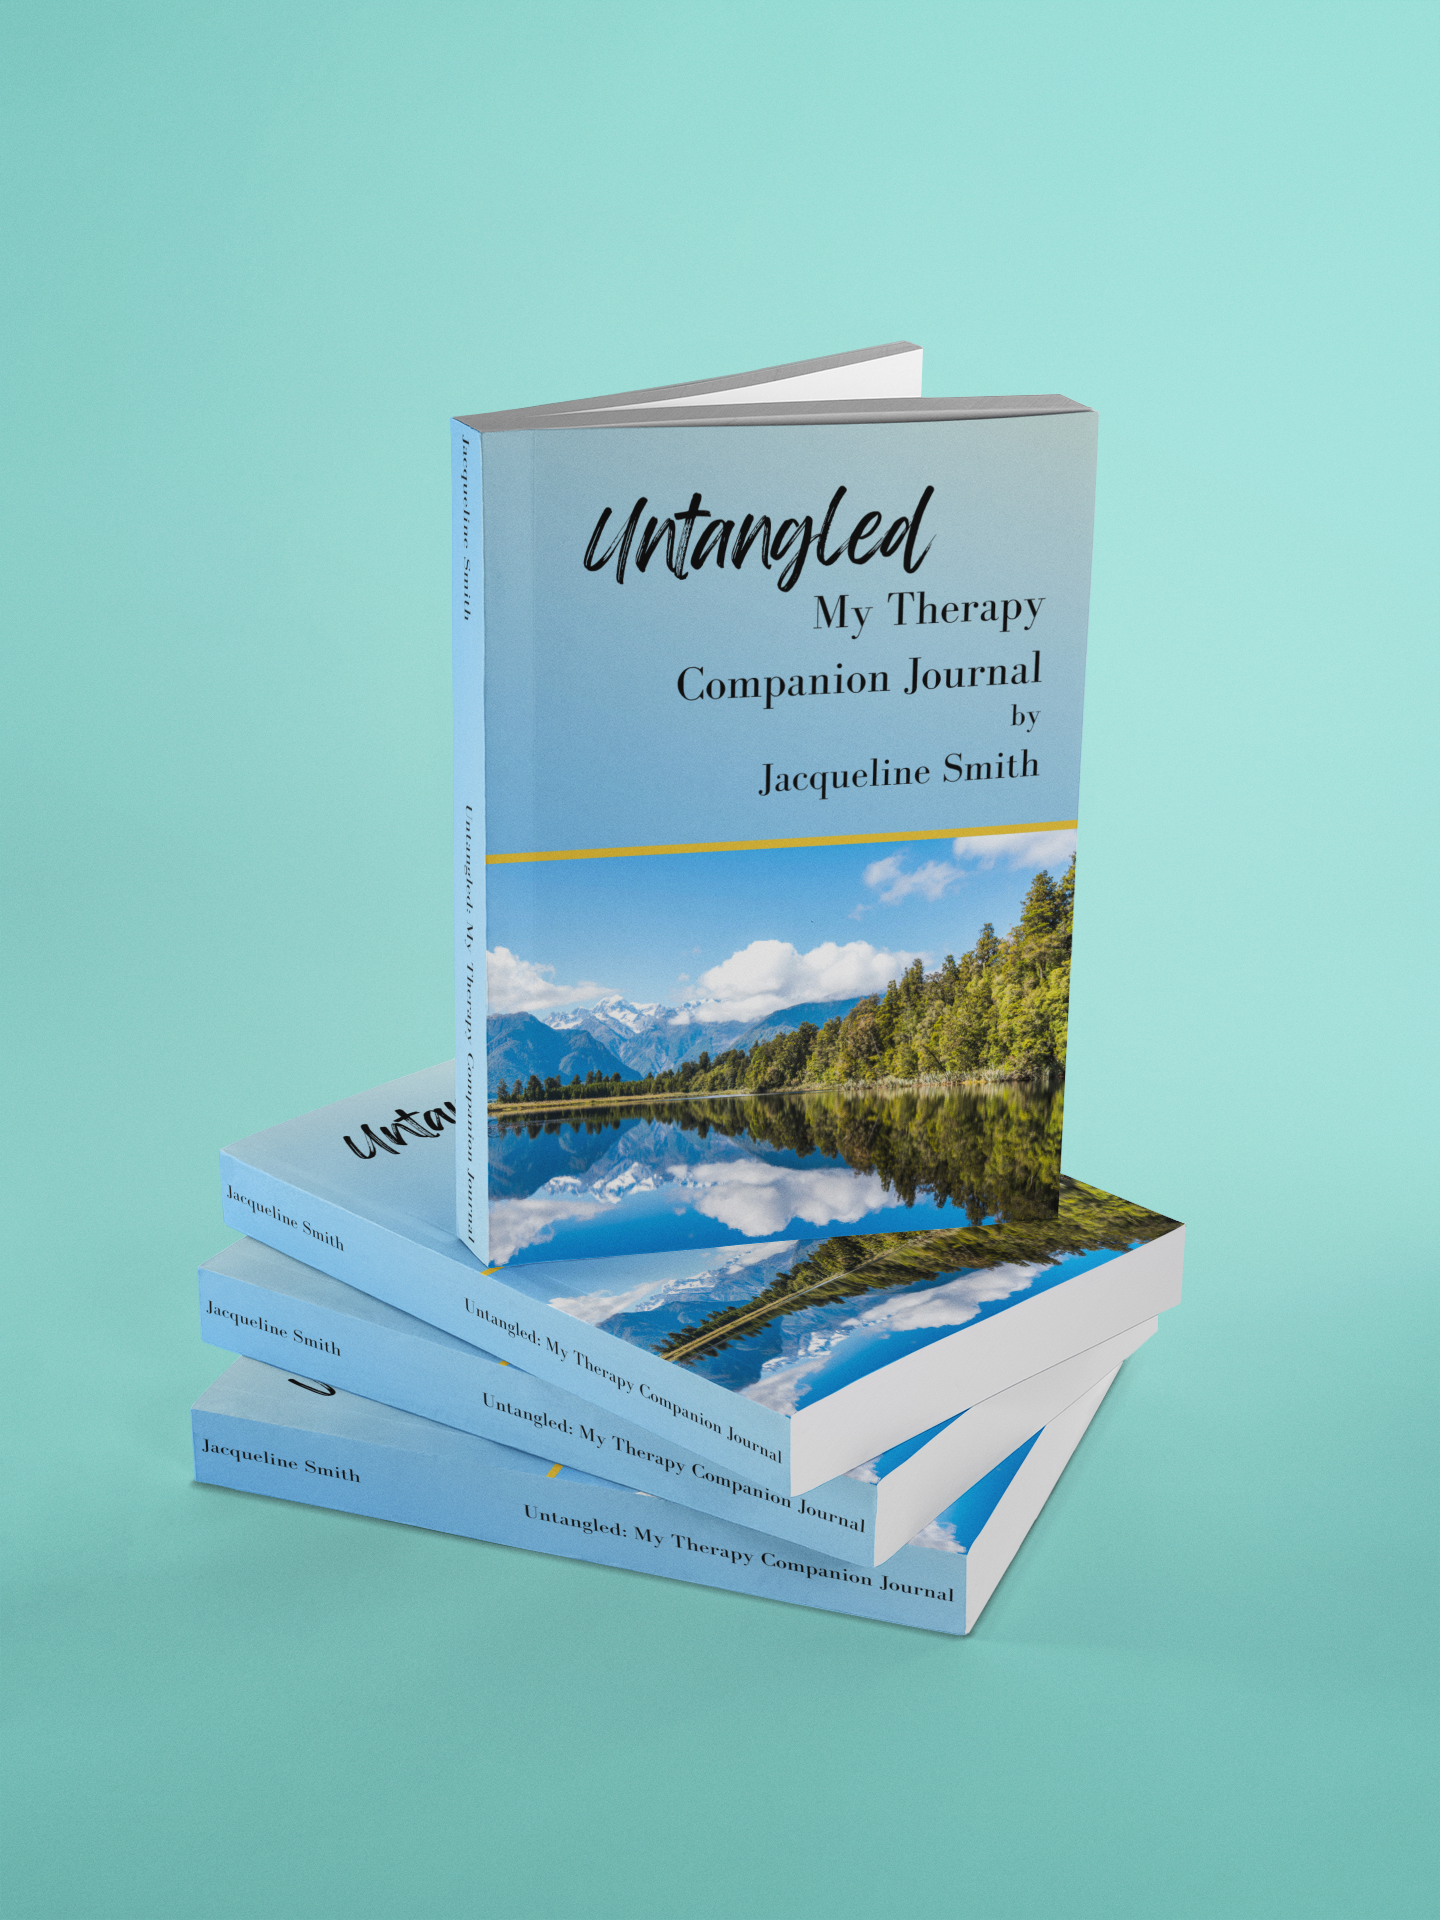 Untangled: My Therapy Companion Journal